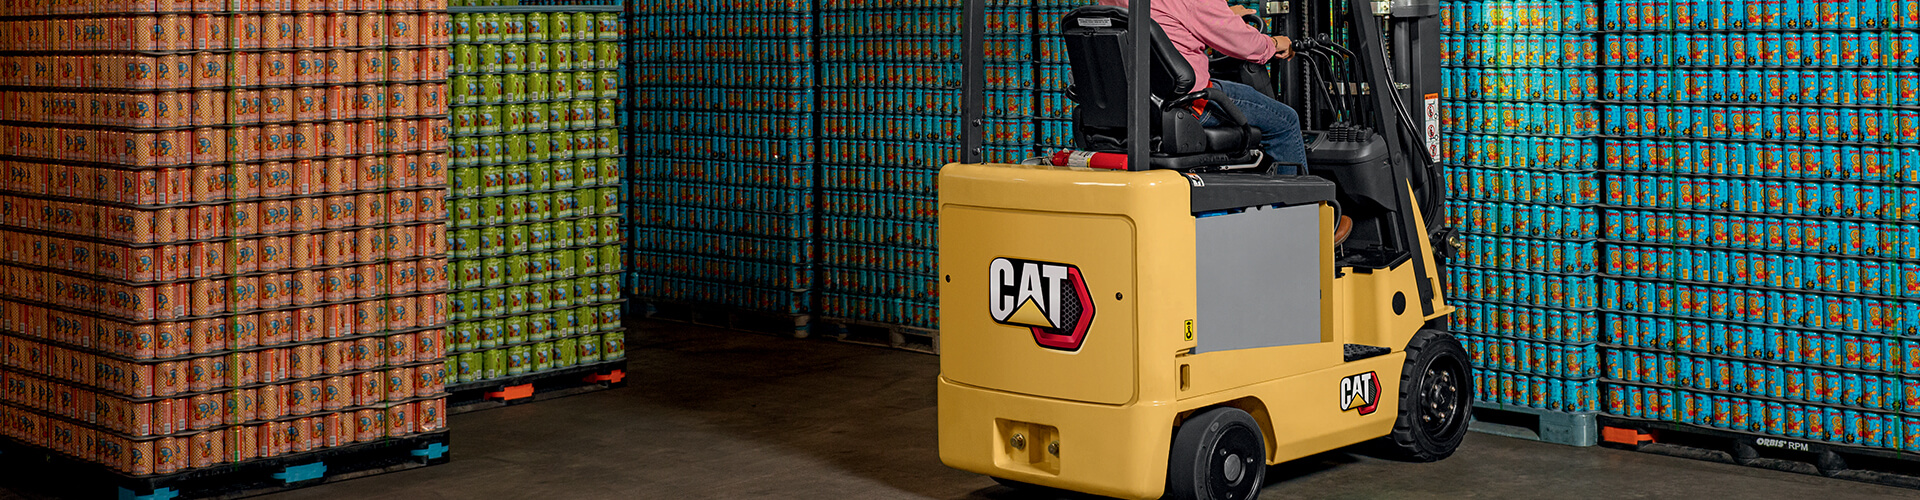 Cat electric forklift packing cans of soda in a warehouse